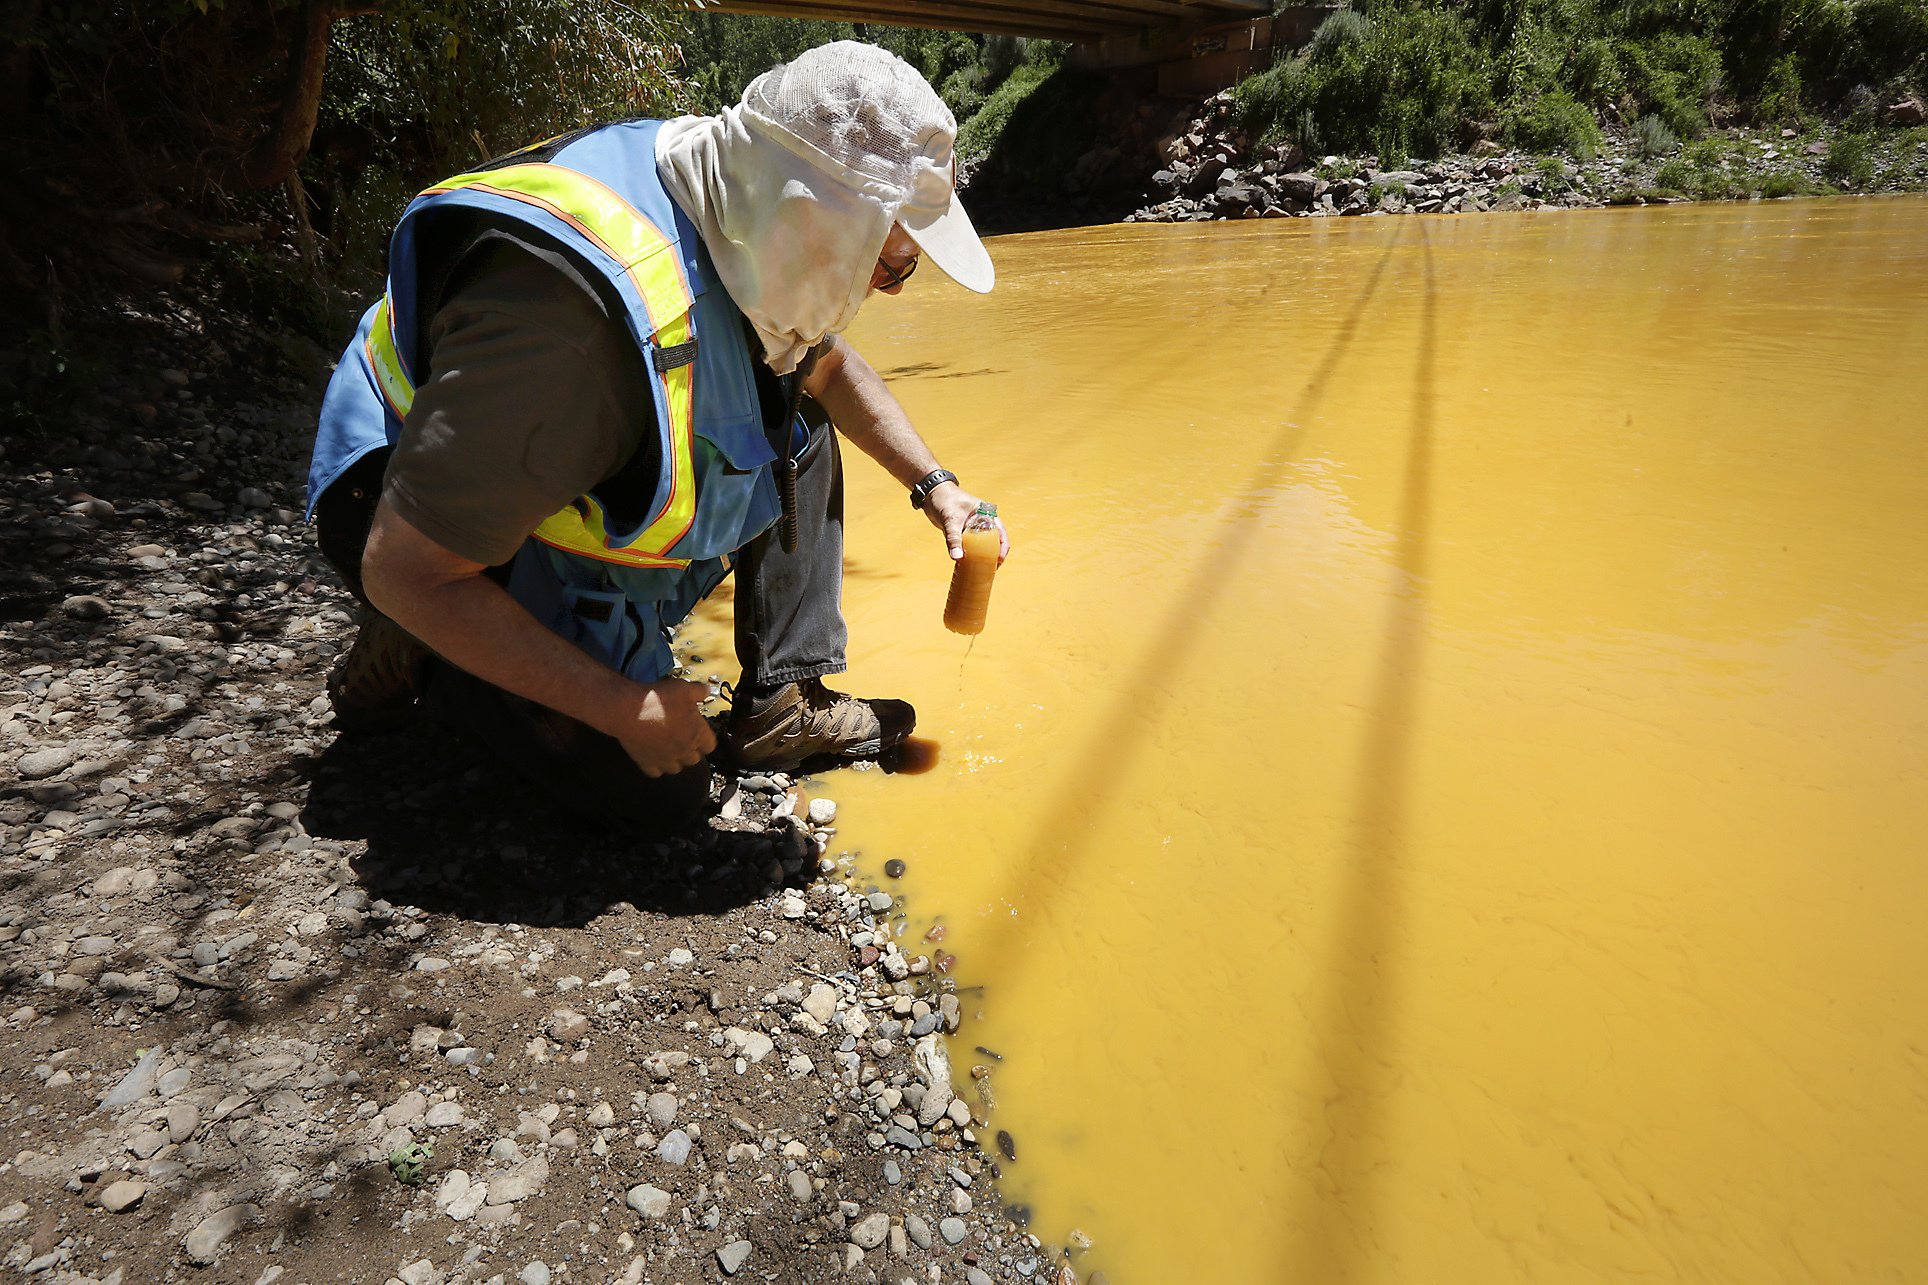 50M gallons of polluted water pours daily from US mine sites